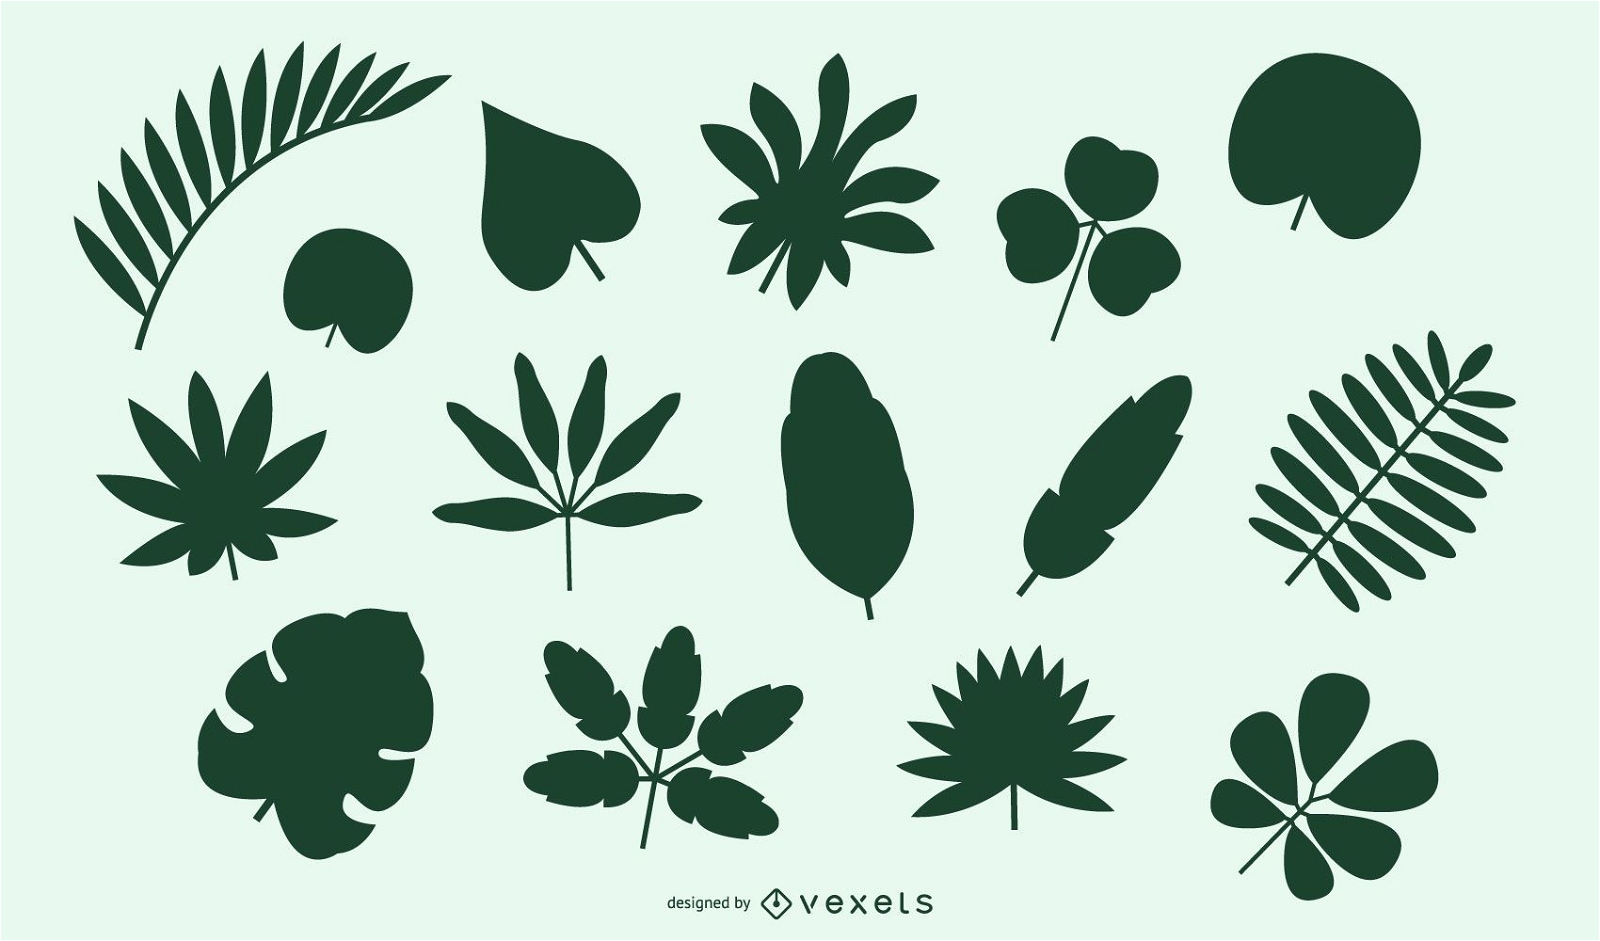 Natural Leaves and Bushes Pack